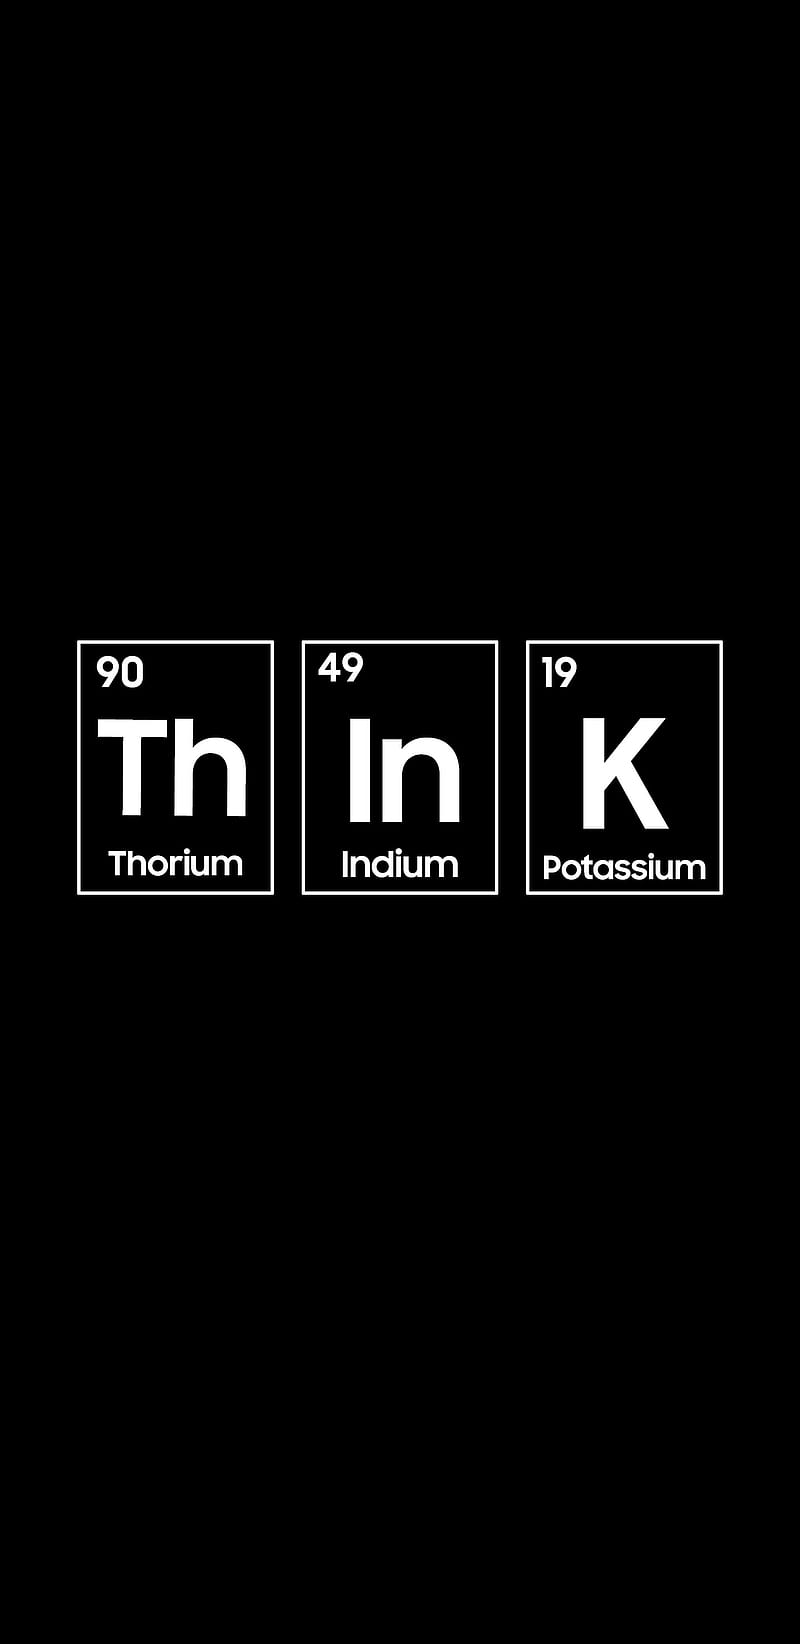 The periodic table of elements with think in it - Chemistry